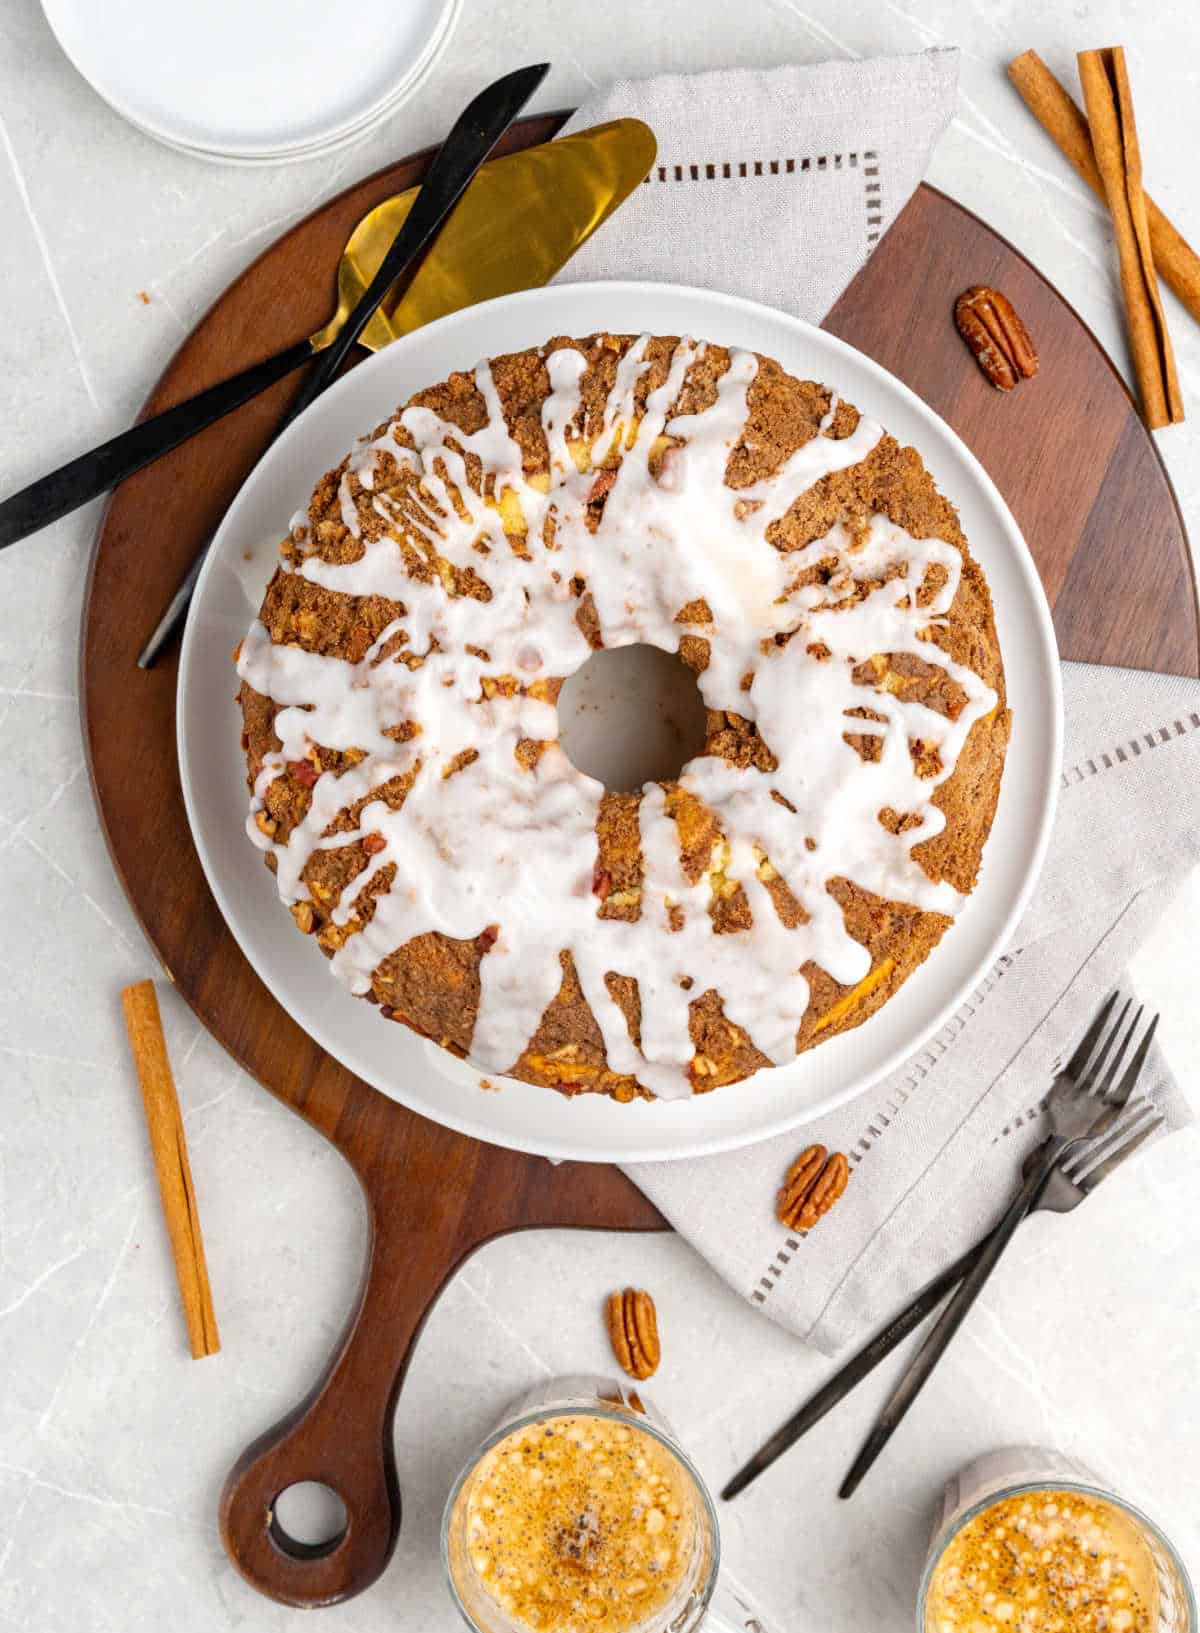 Whole glazed coffee cake on a white plate set on a round wooden board. Grey surface with coffee cups and forks.